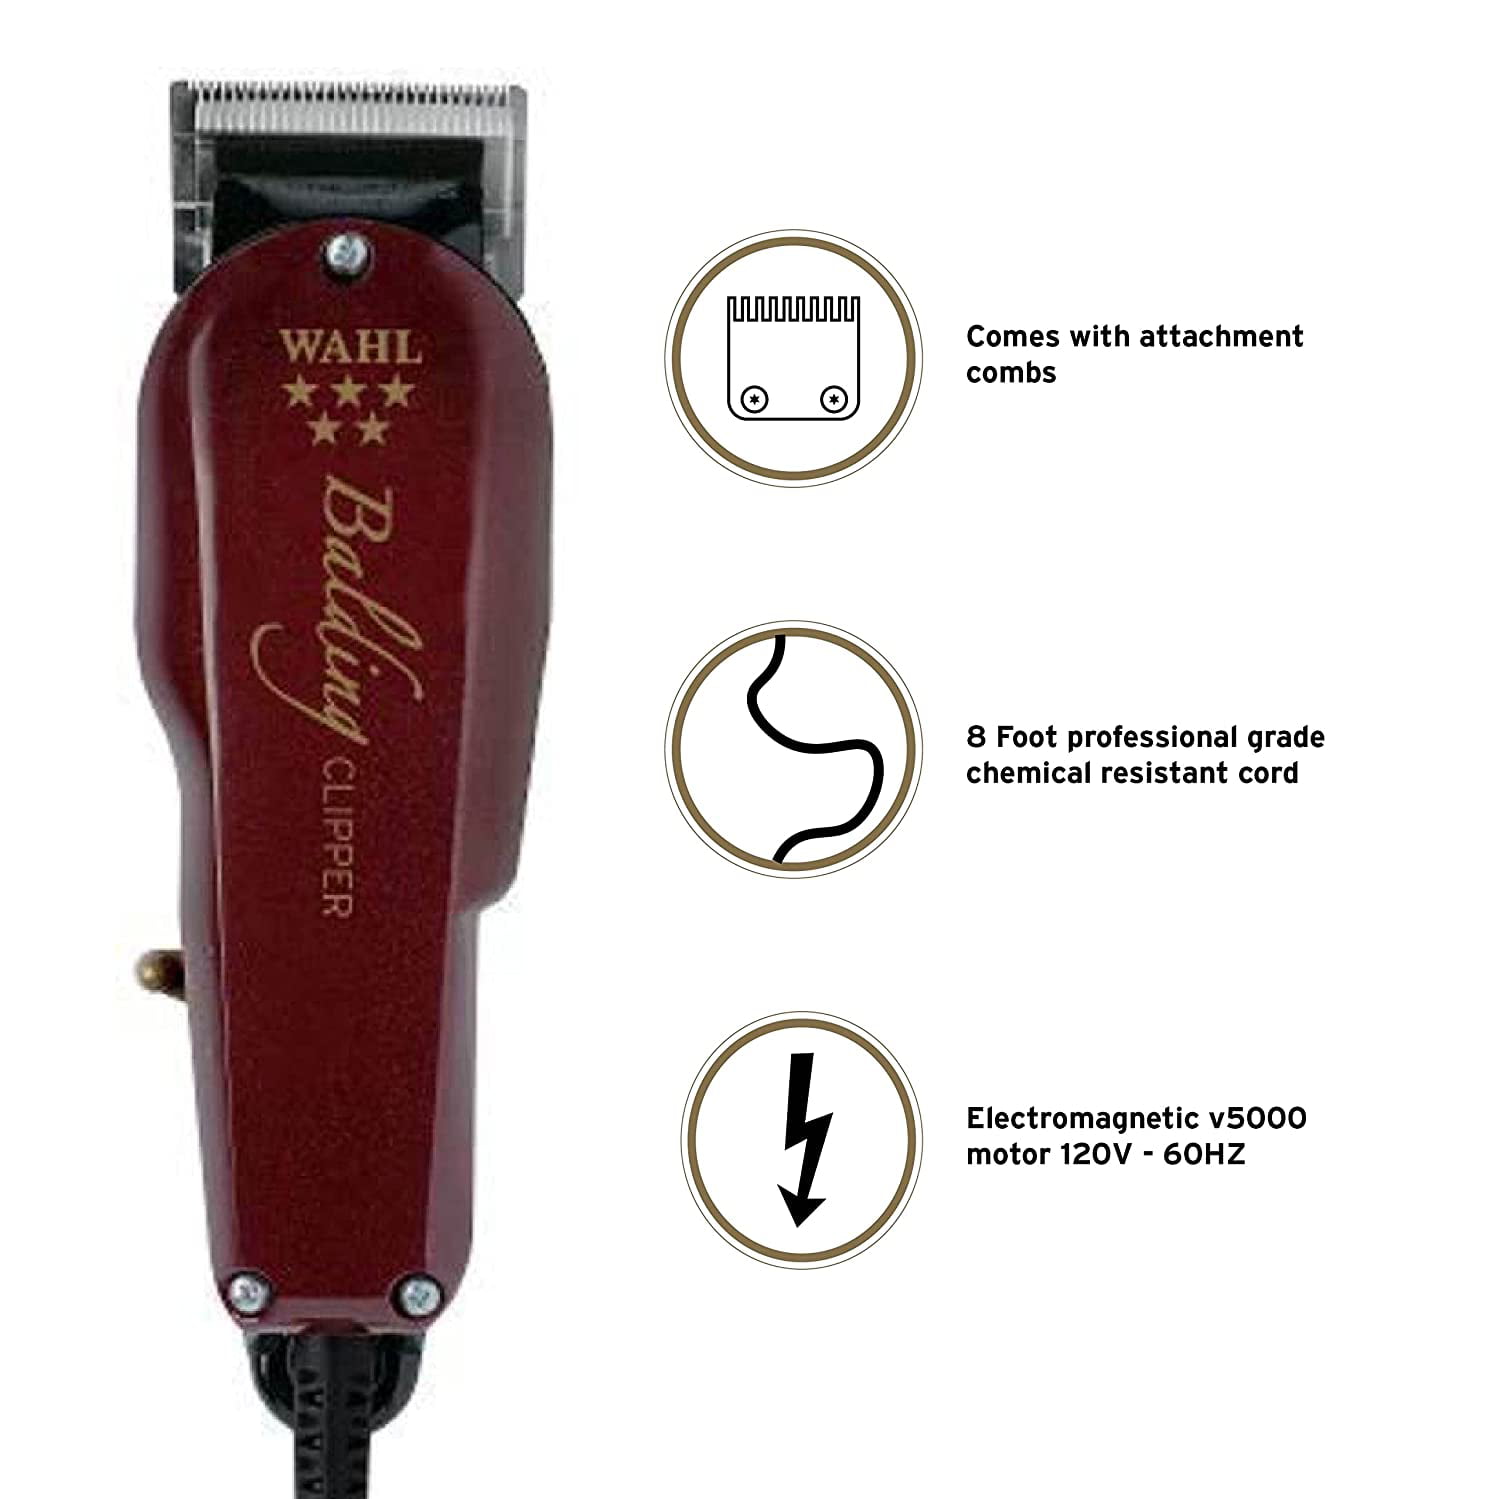 Wahl Professional 5-Star Balding Clipper with V5000+ Electromagnetic Motor  and 2105 Balding Blade for Ultra Close Trimming, Outlining and for Full  Head Balding for Professional Barbers - Model 8110 